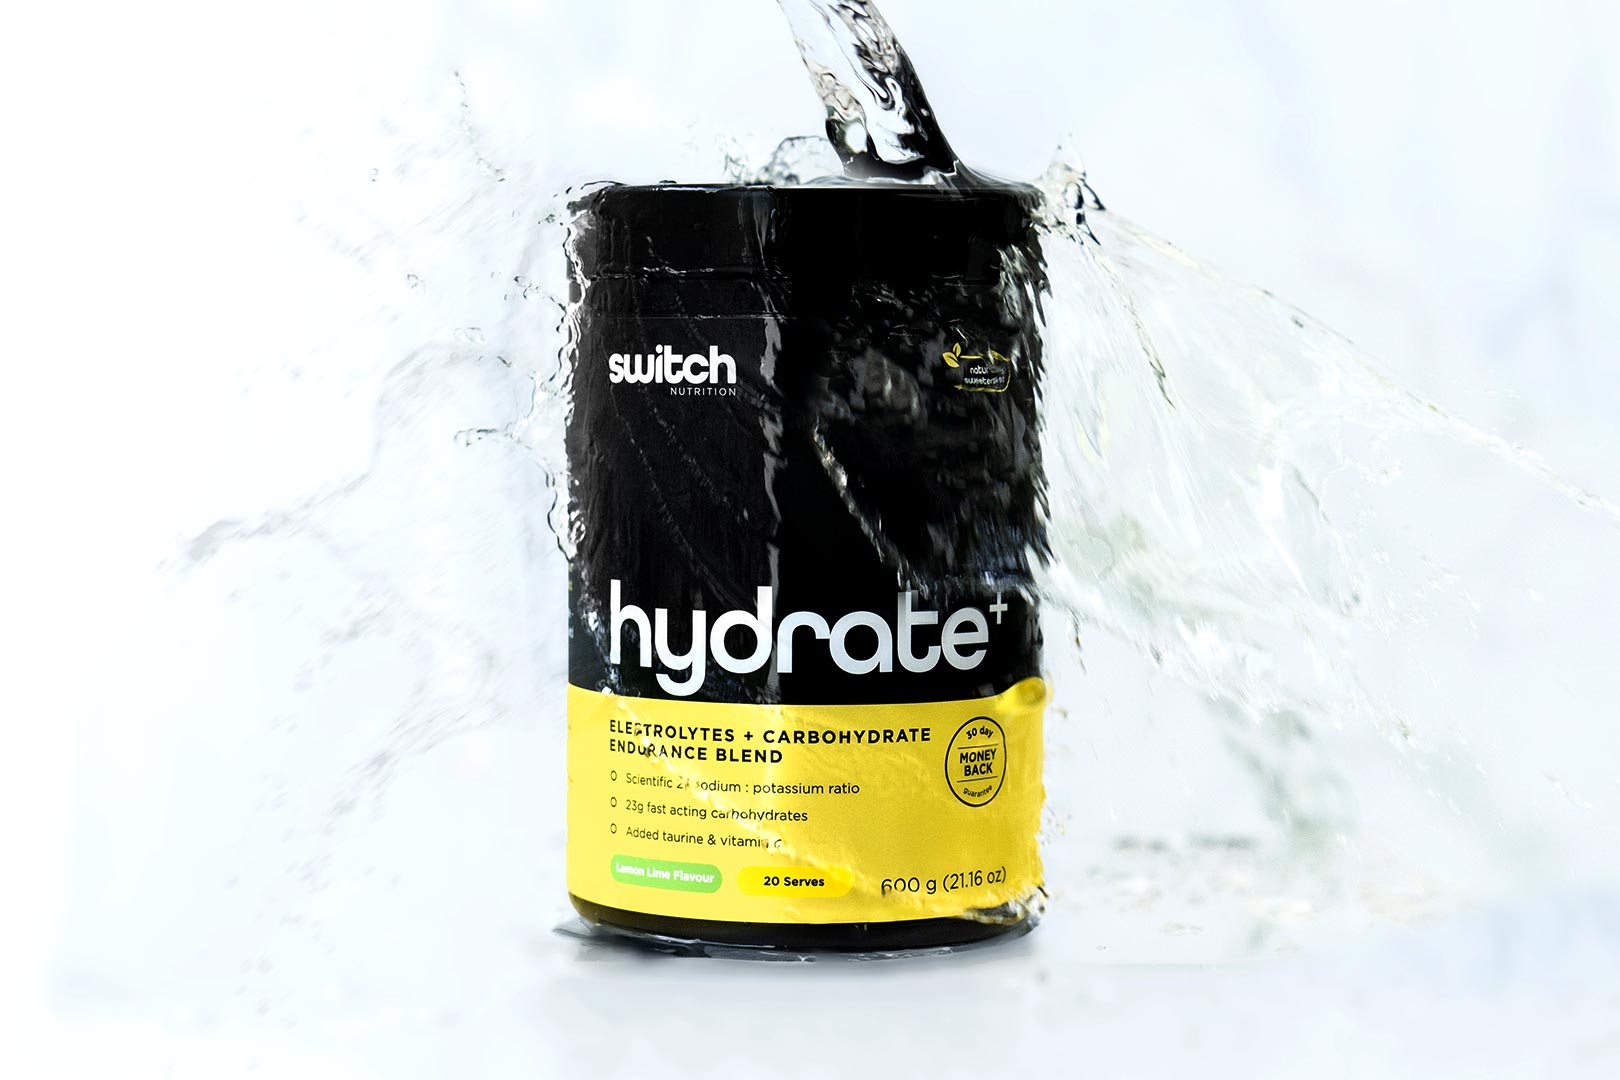 Switch Nutrition Hydrate